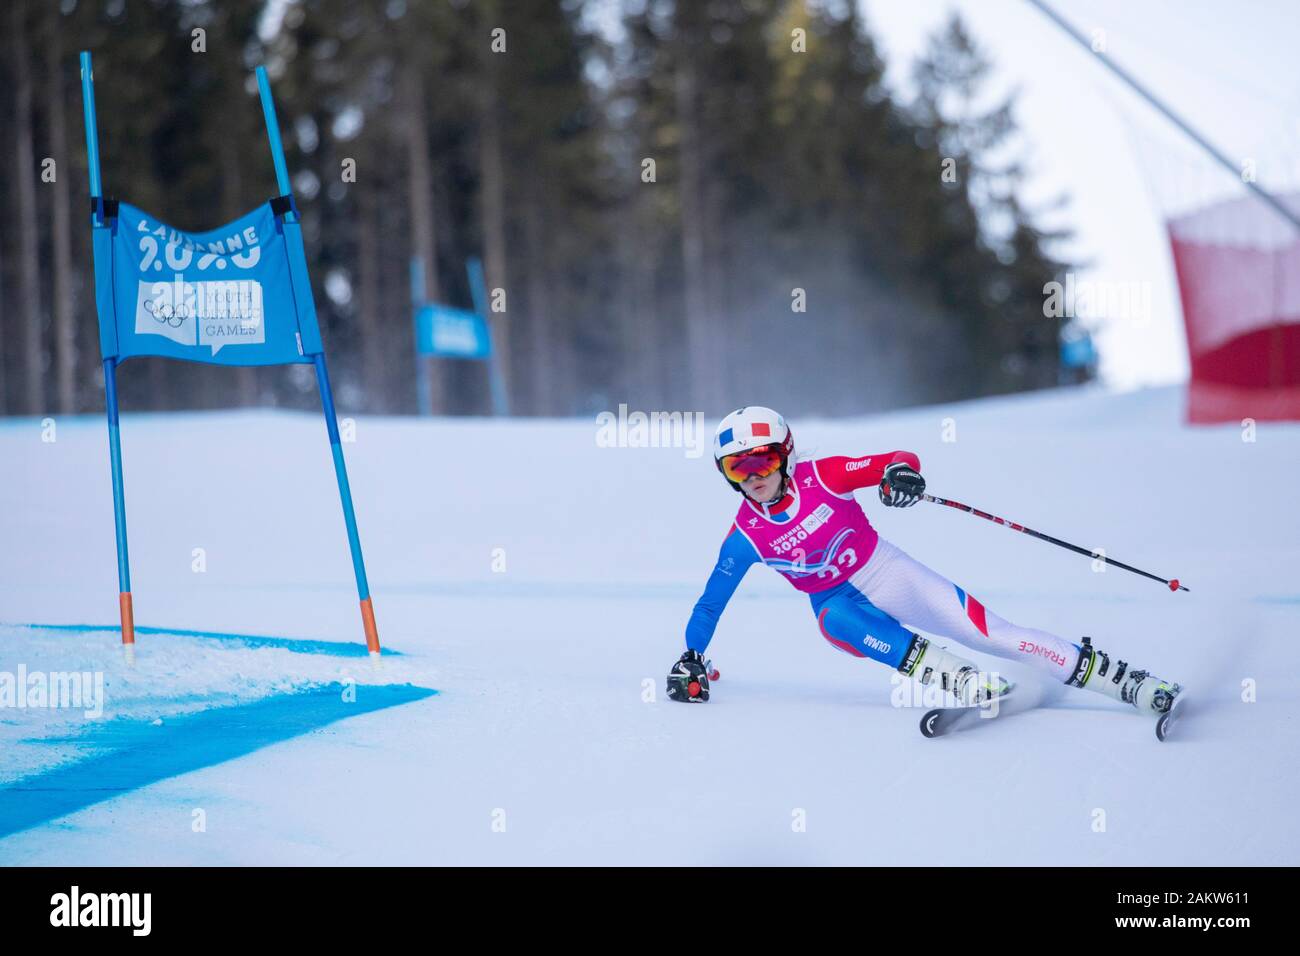 Alpine skier, Alizee Dahon, FRA competes in the Lausanne 2020 Women's Super G Downhill Skiing At Les Diablerets Alpine Centre In Switzerland Stock Photo